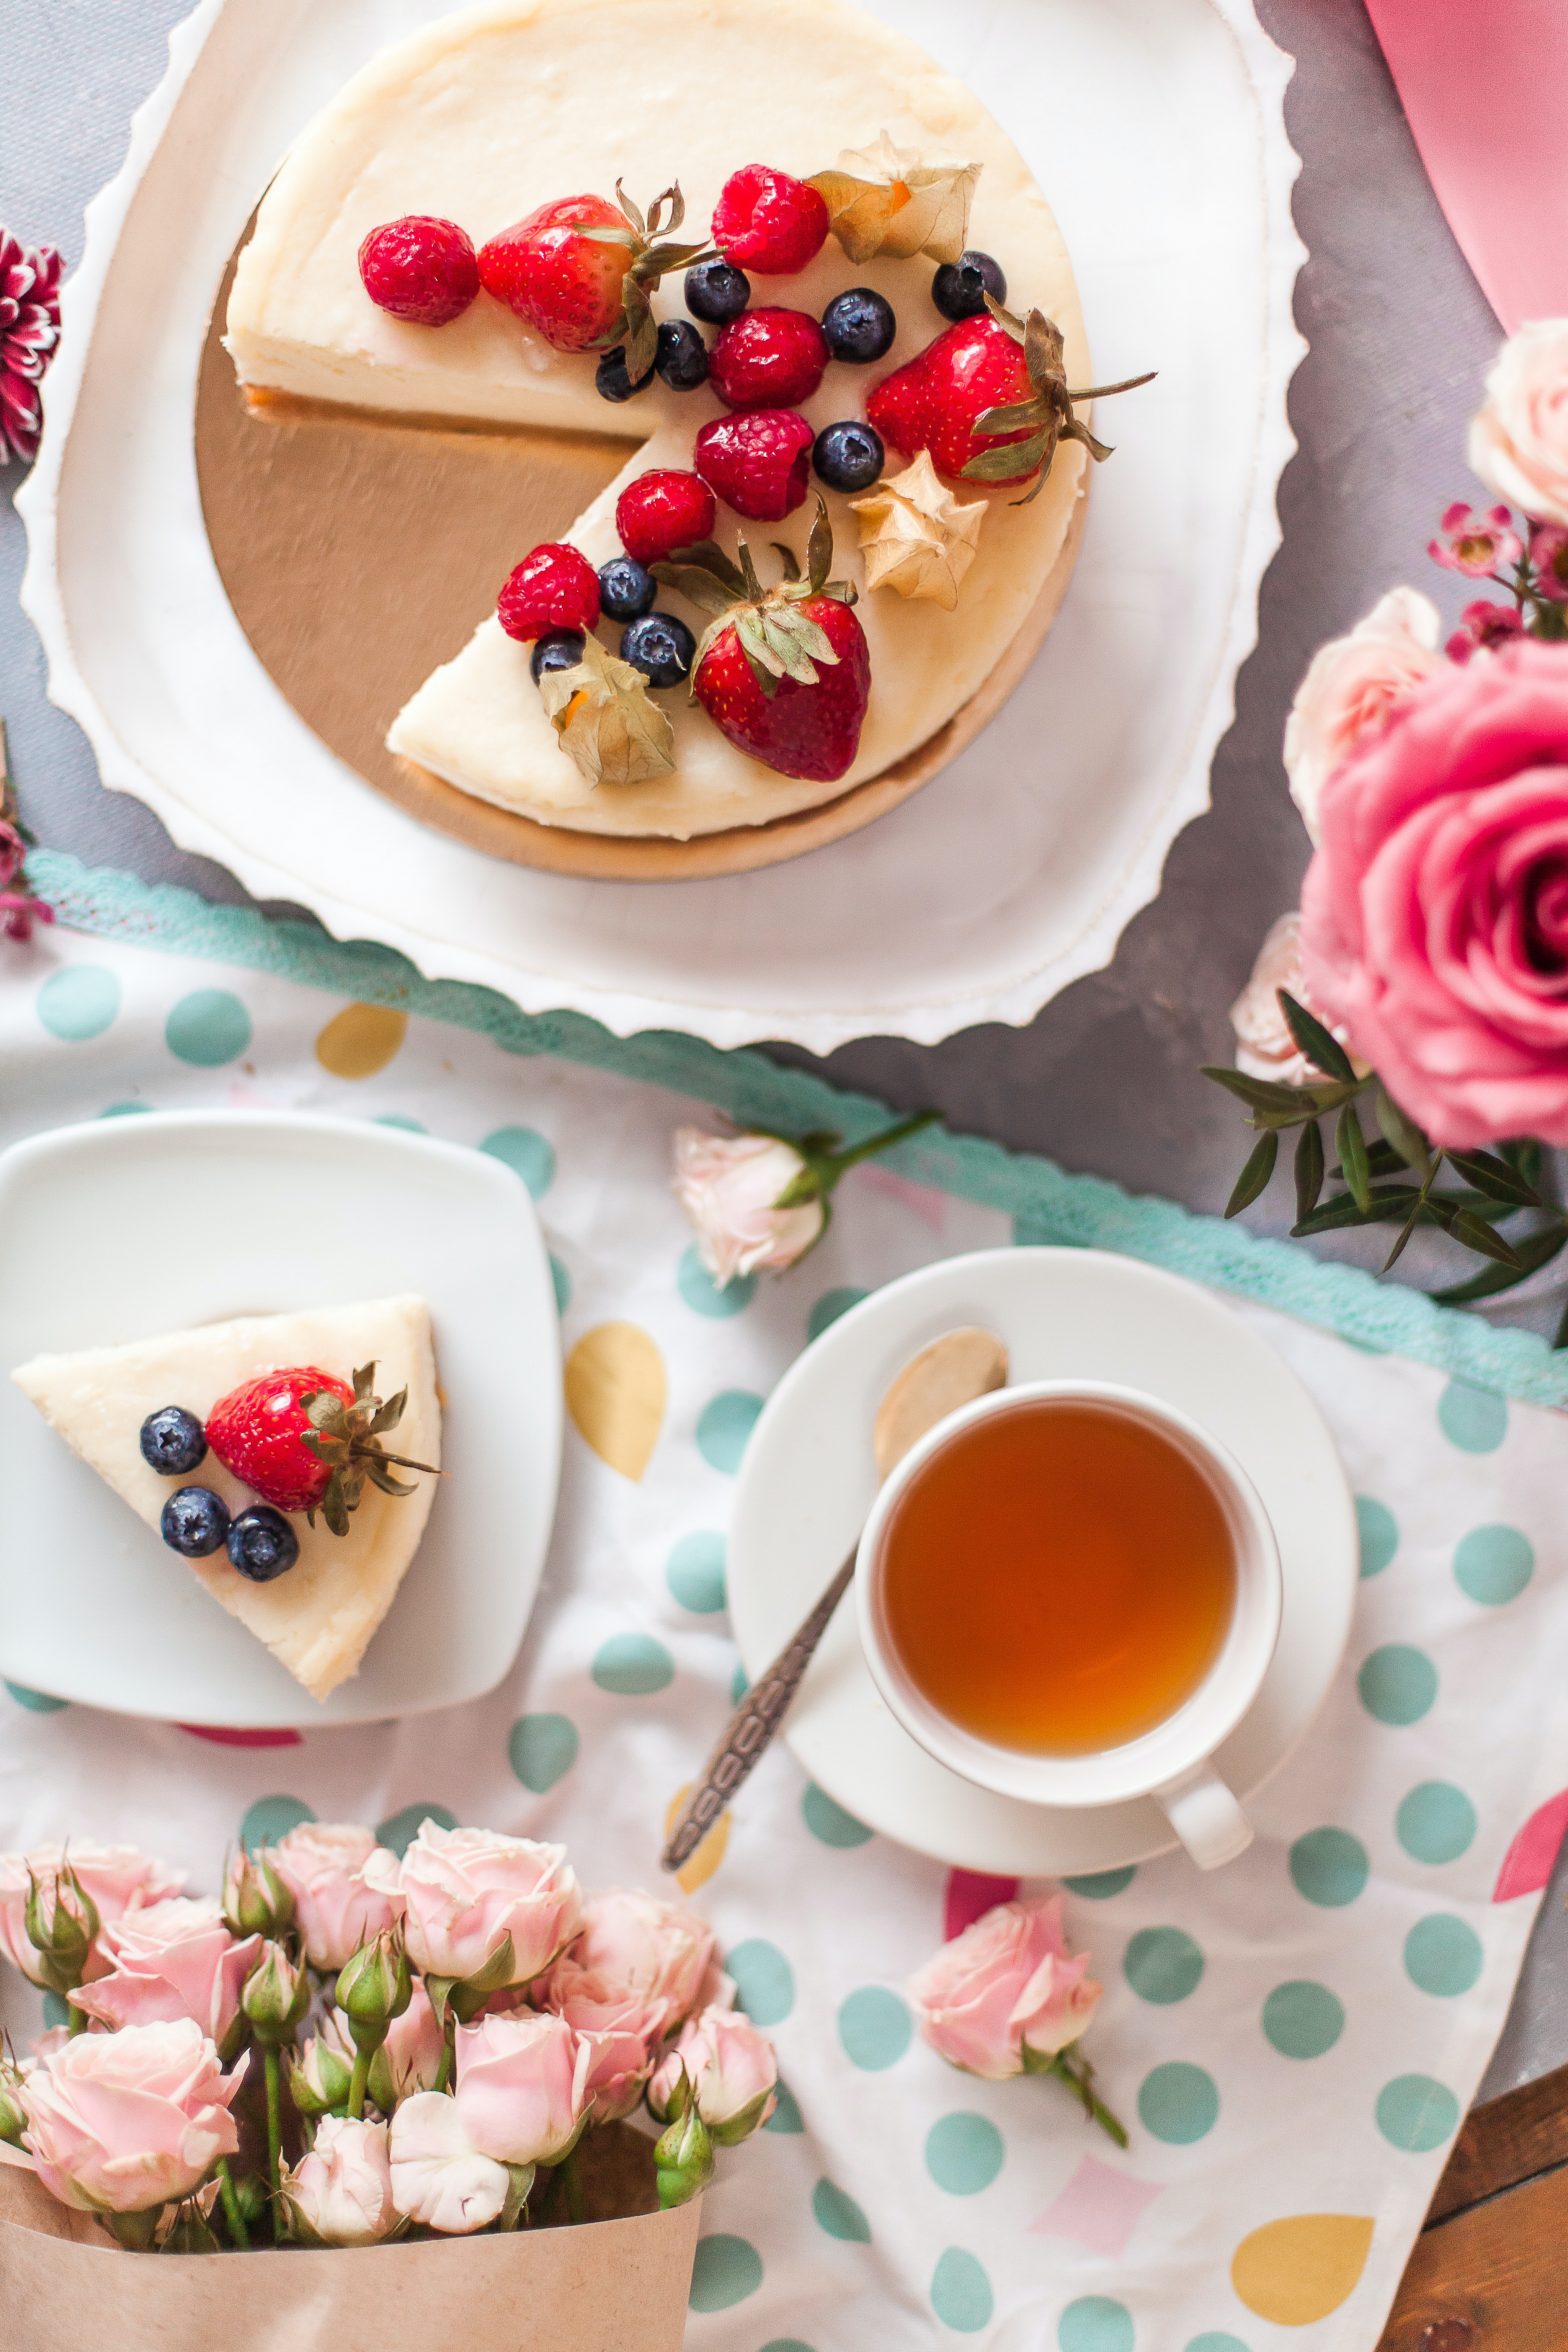 A cup and saucer of tea with a cheesecake topped in fruit, surrounded by flowers.